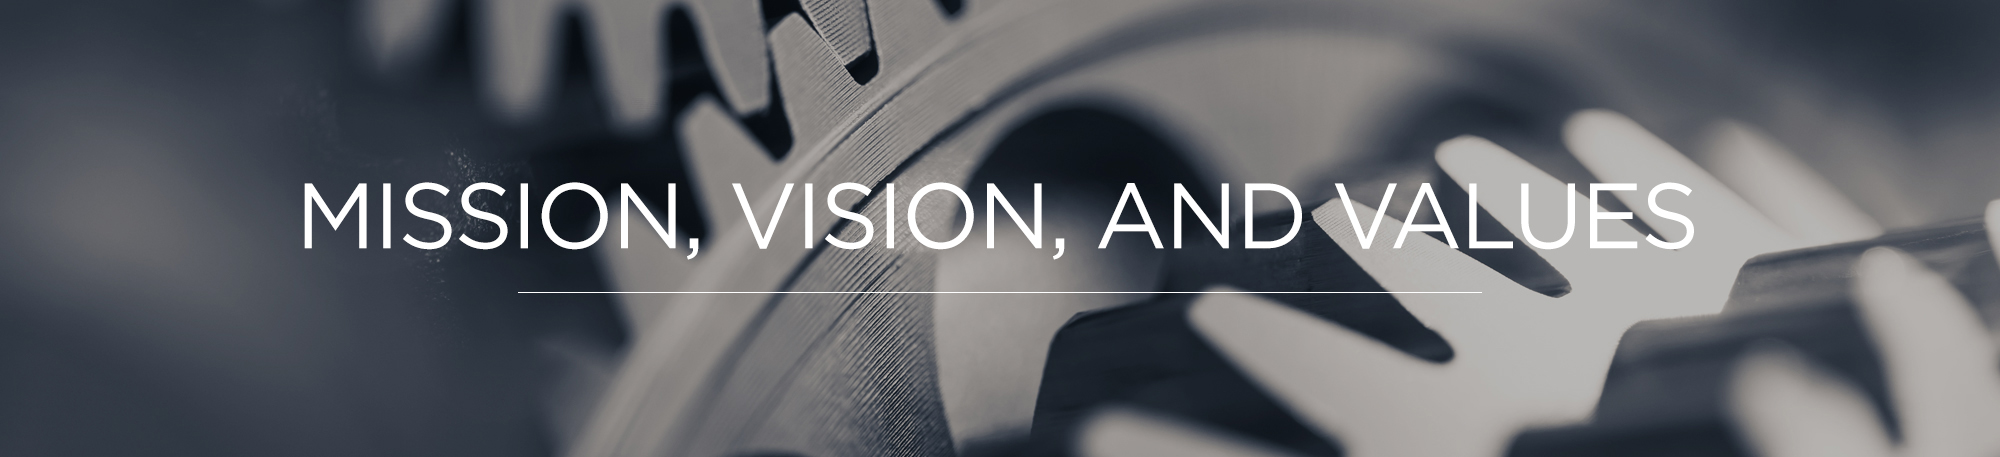 Mission, Vision, and Values